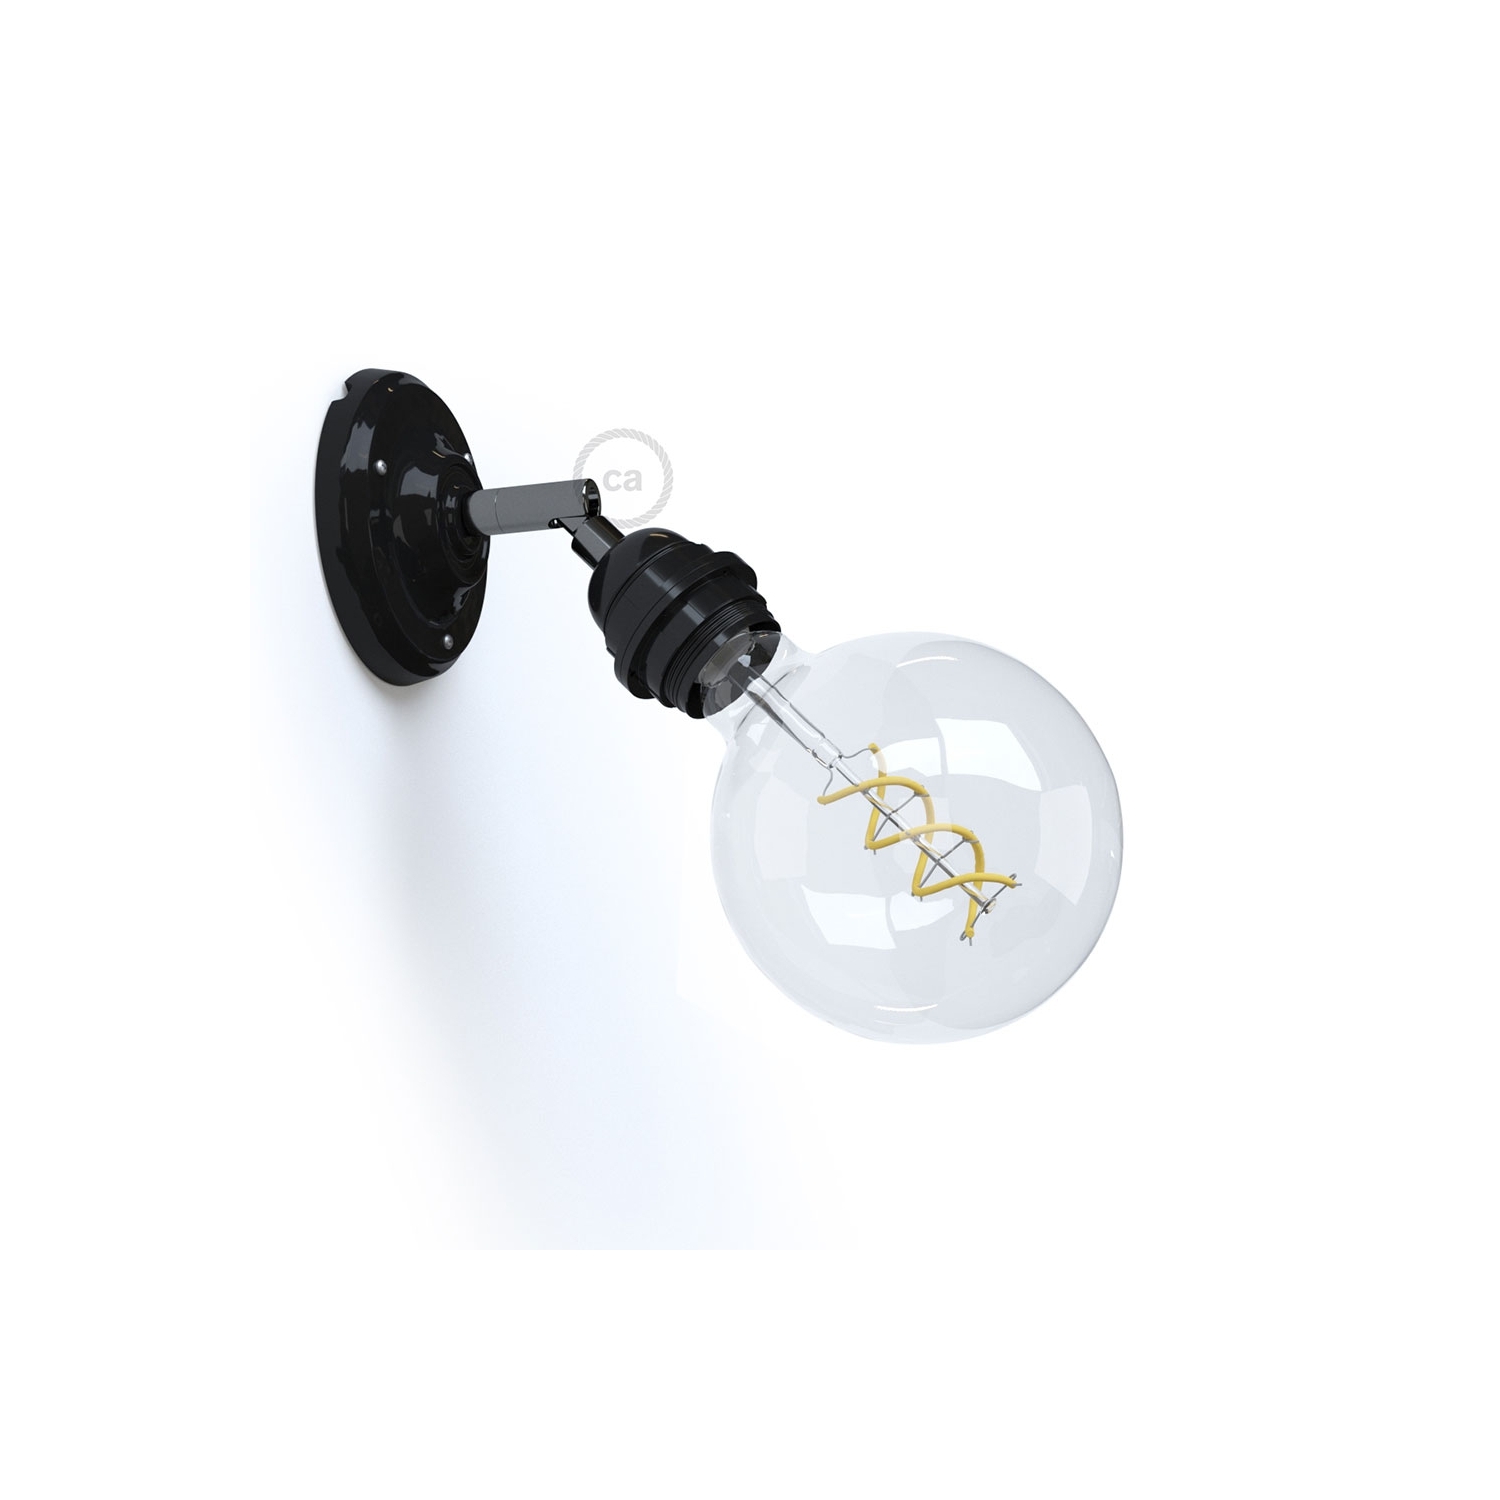 Fermaluce Classic 90° Black, adjustable, with E26 threaded lamp holder, the porcelain wall or ceiling light source